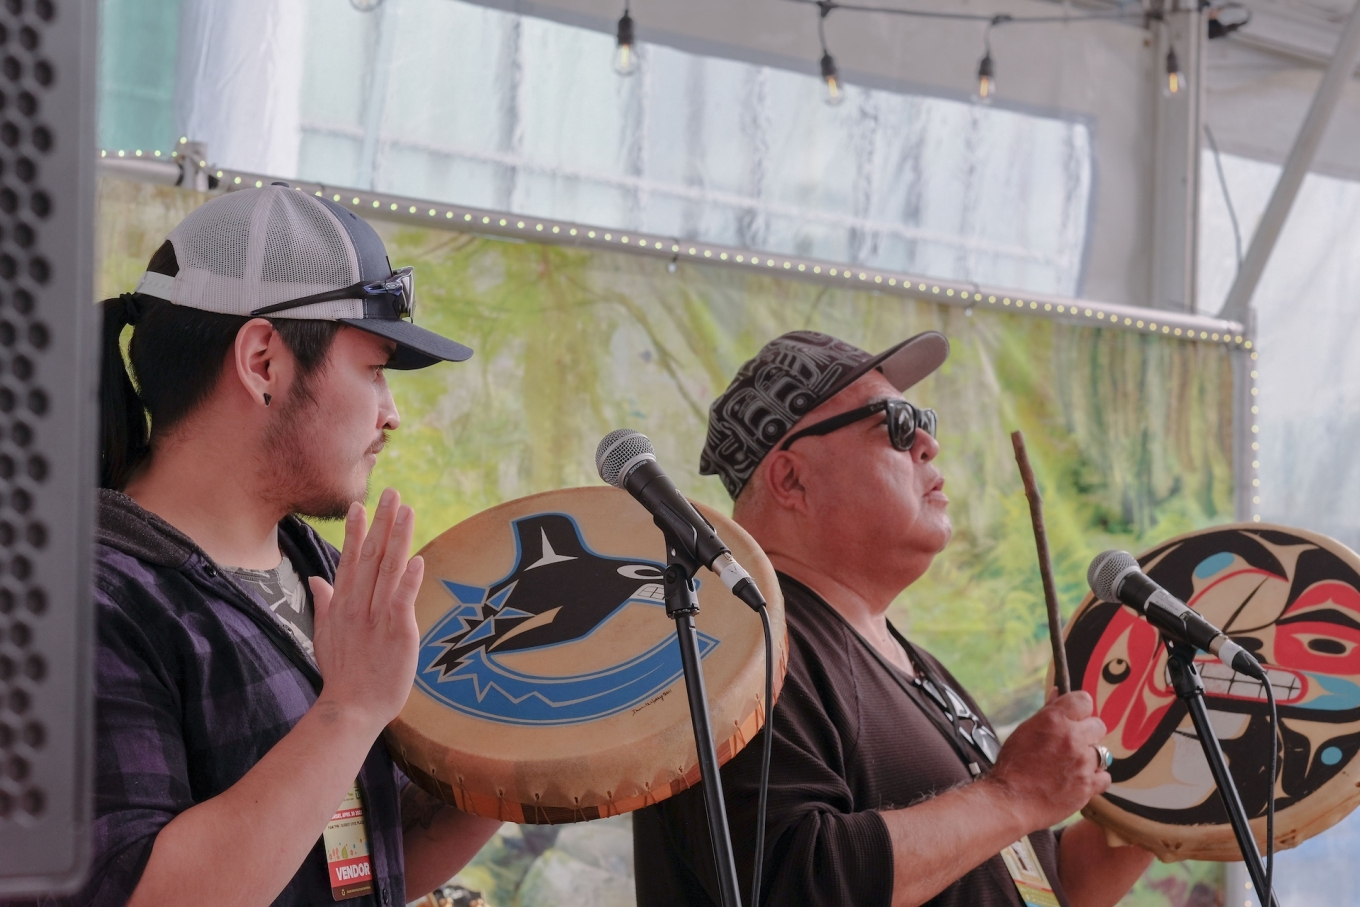 Two indigenous men singing and drumming on stage